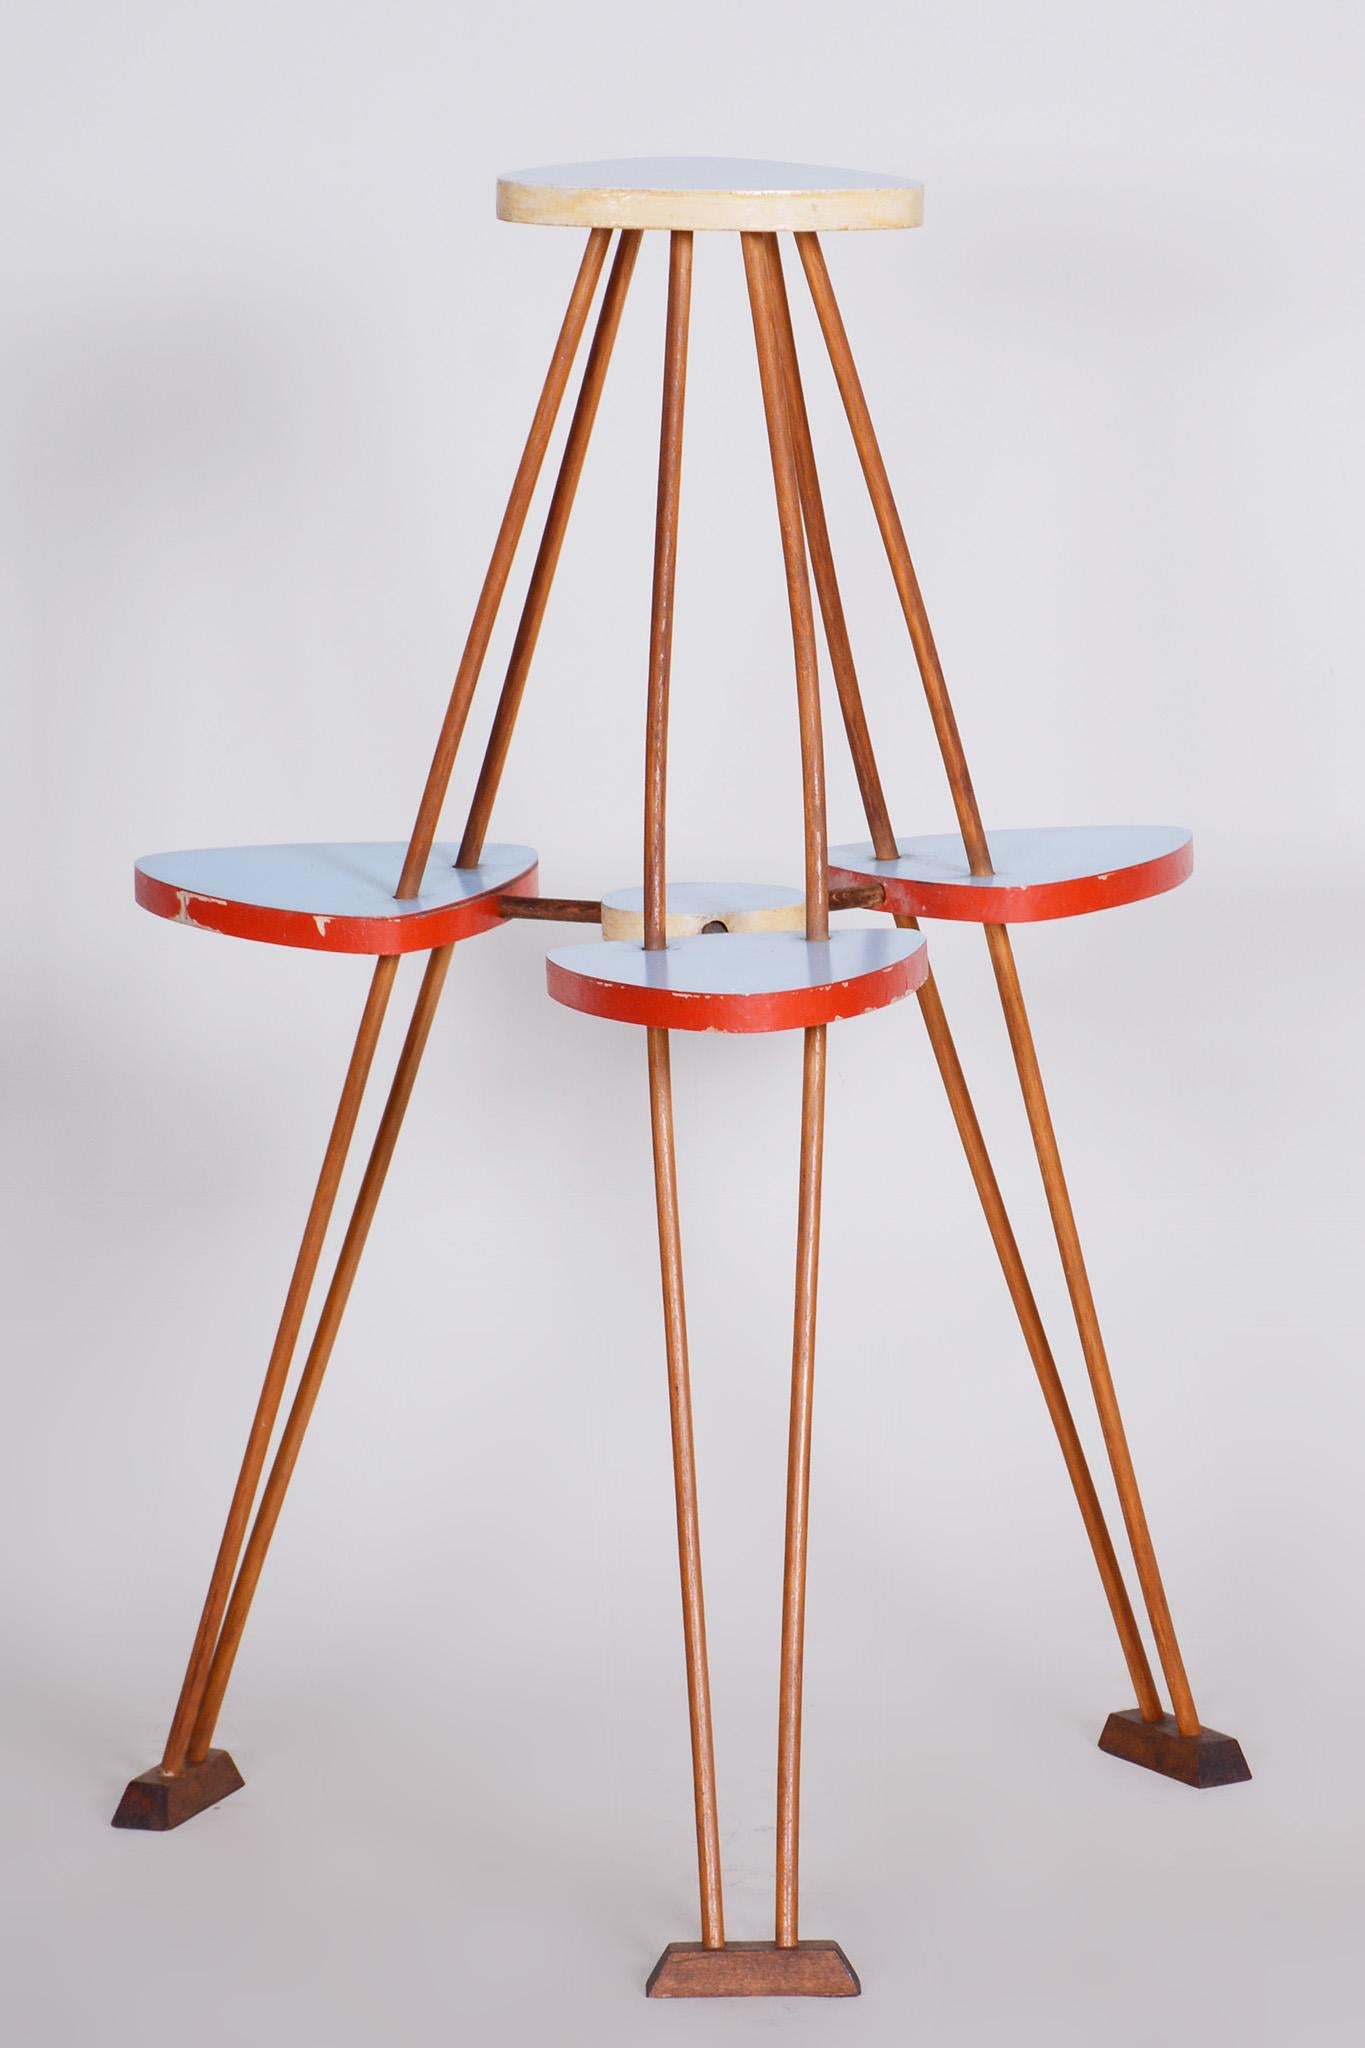 Unusual Restored Mid-Century Flower Stand, Beech and Umakart, Czechia, 1950s For Sale 2